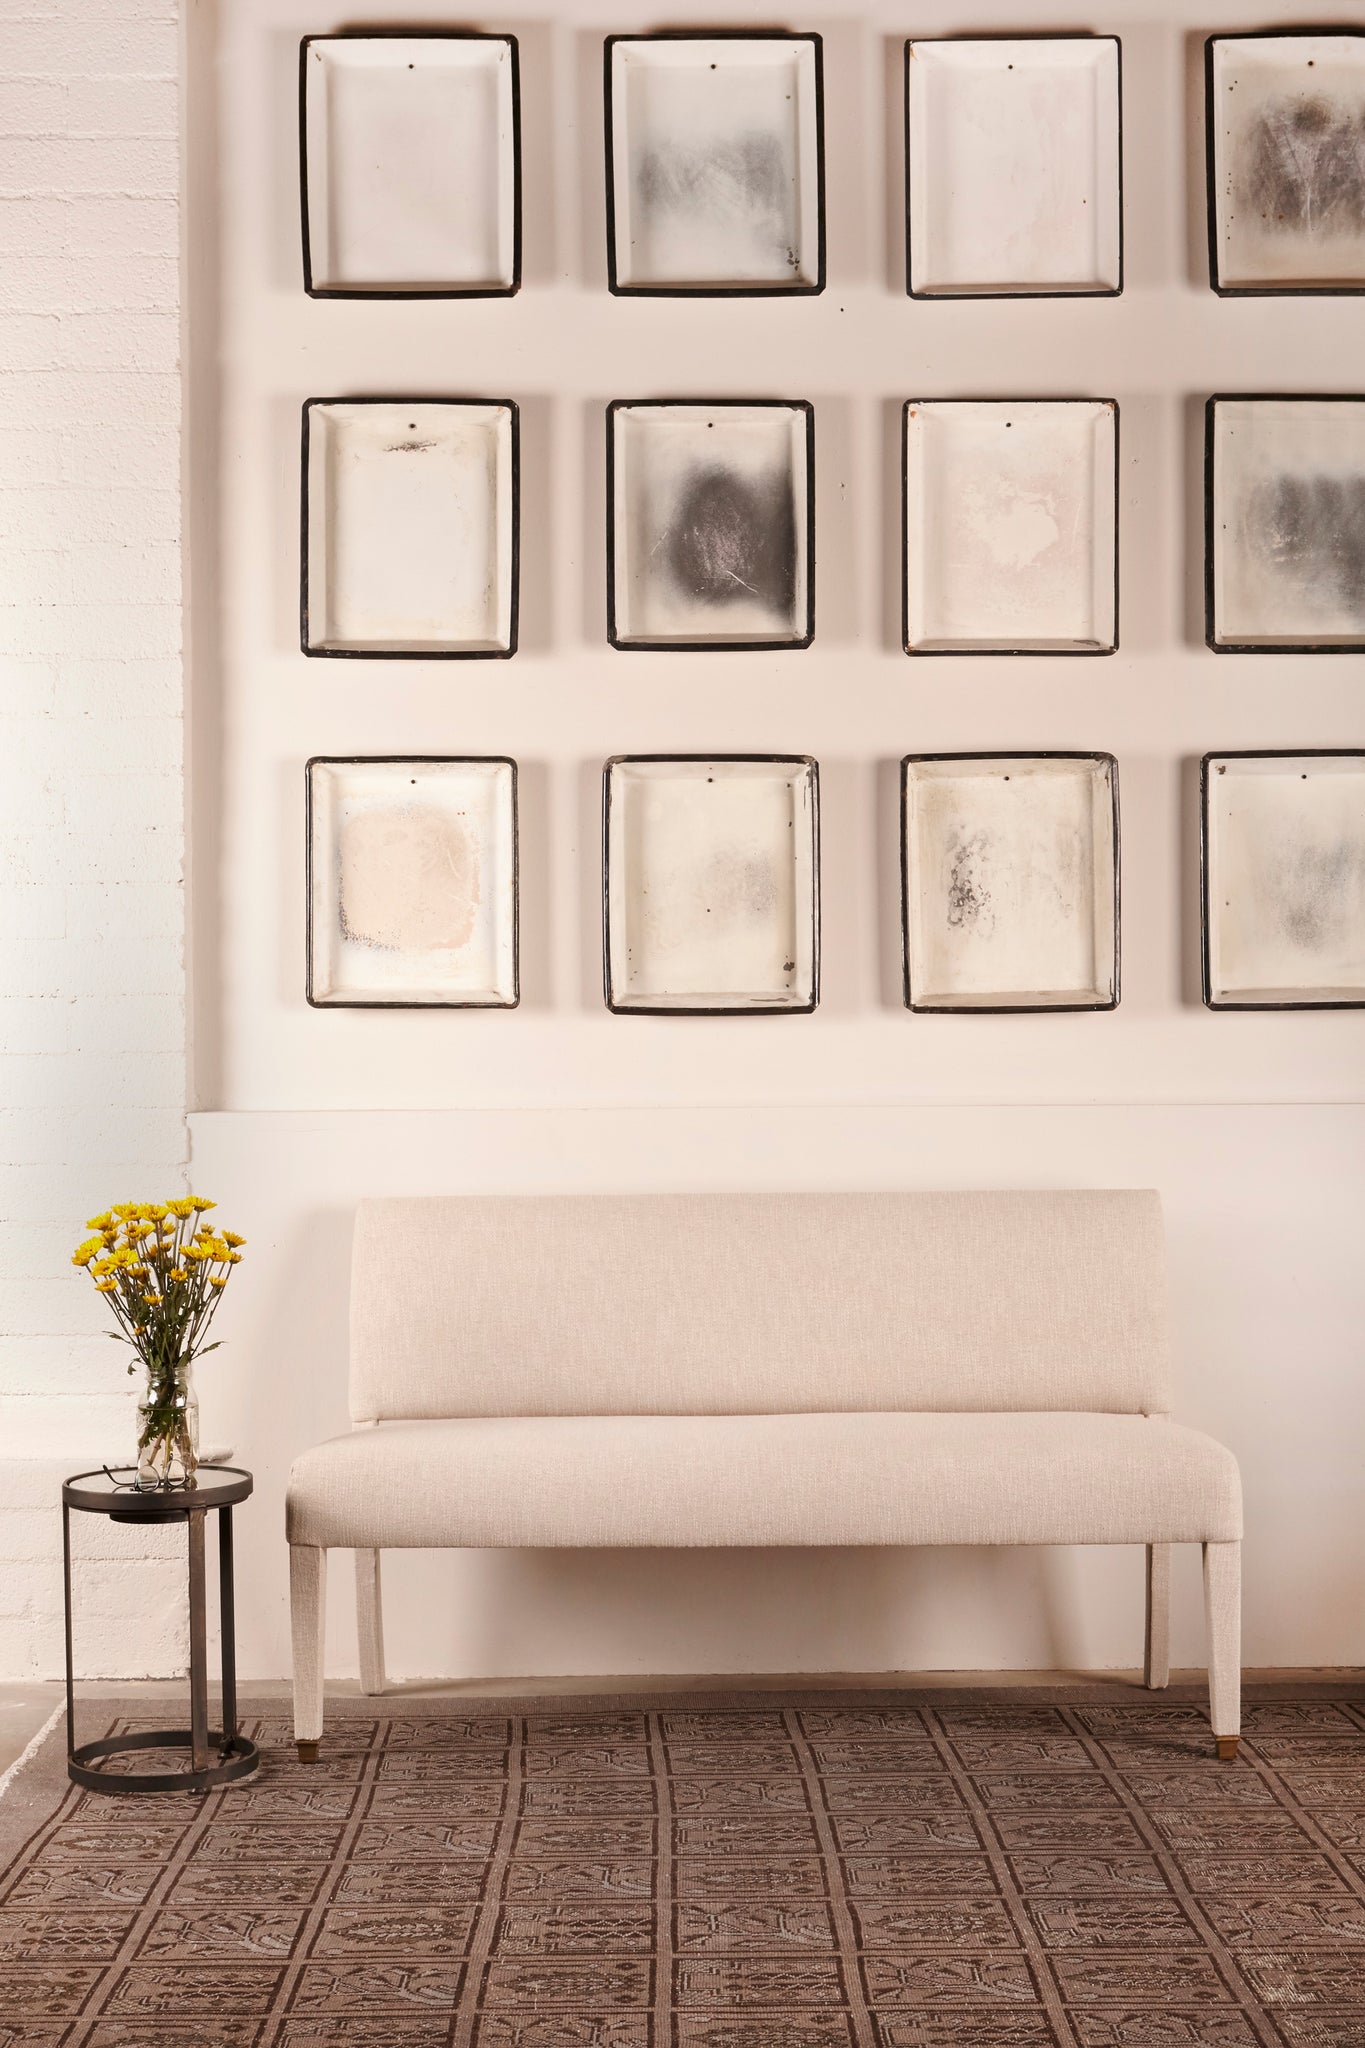  white wall interior with art in grid on wall and one white banquette  